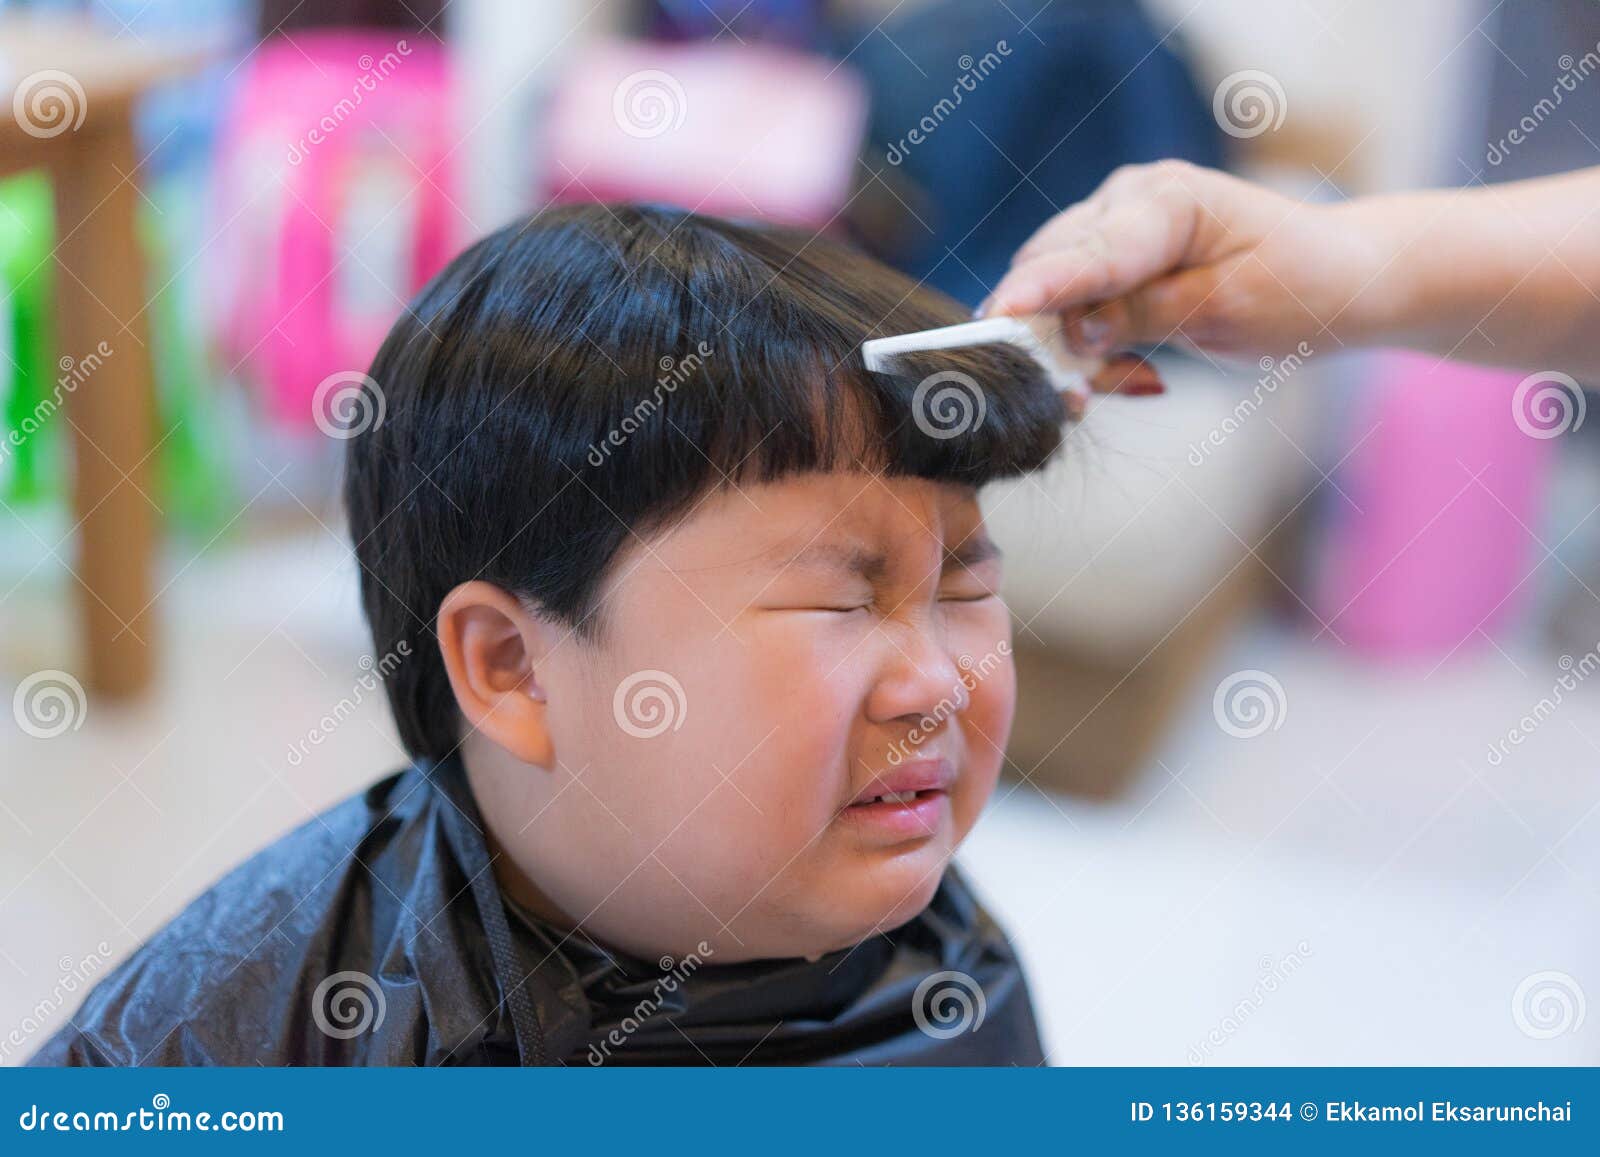 Grandmother is Cutting Hair of Her Grandson at Home Stock Photo - Image of  asian, background: 136159344